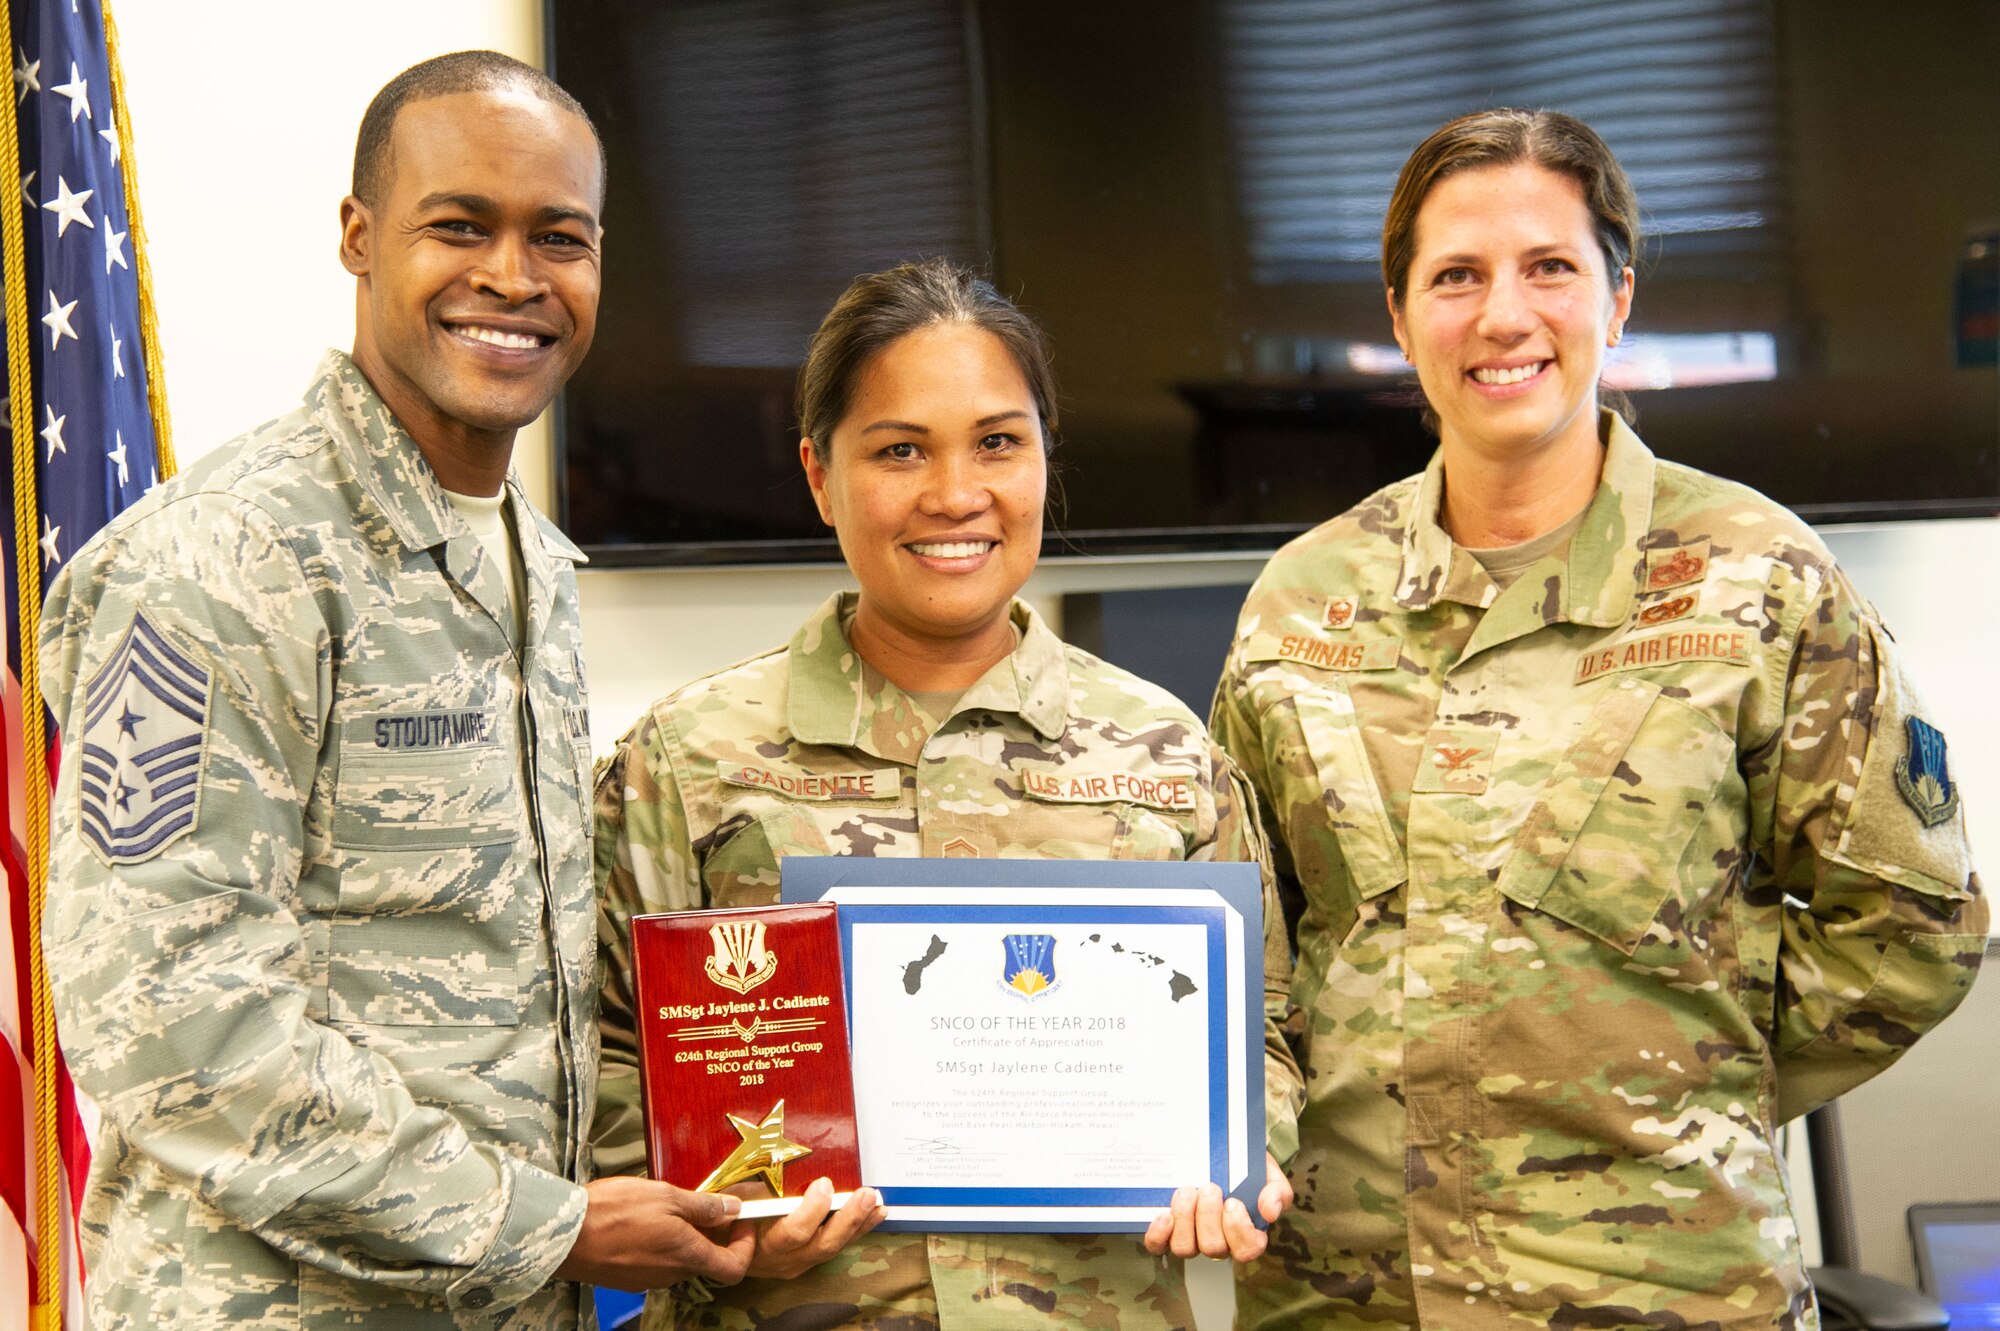 Senior Master Sgt. Jaylene Cadiente, a Reserve Citizen Airmen from the 624th Regional Support Group, receives the Group’s 2018 Senior Noncommissioned Officer of the Year award from Col. Athanasia Shinas, 624th RSG commander, and Chief Master Sgt. Danyell Stoutamire, 624th RSG command chief, during an awards presentation March 3, 2019, at Joint Base Pearl Harbor-Hickam, Hawaii.